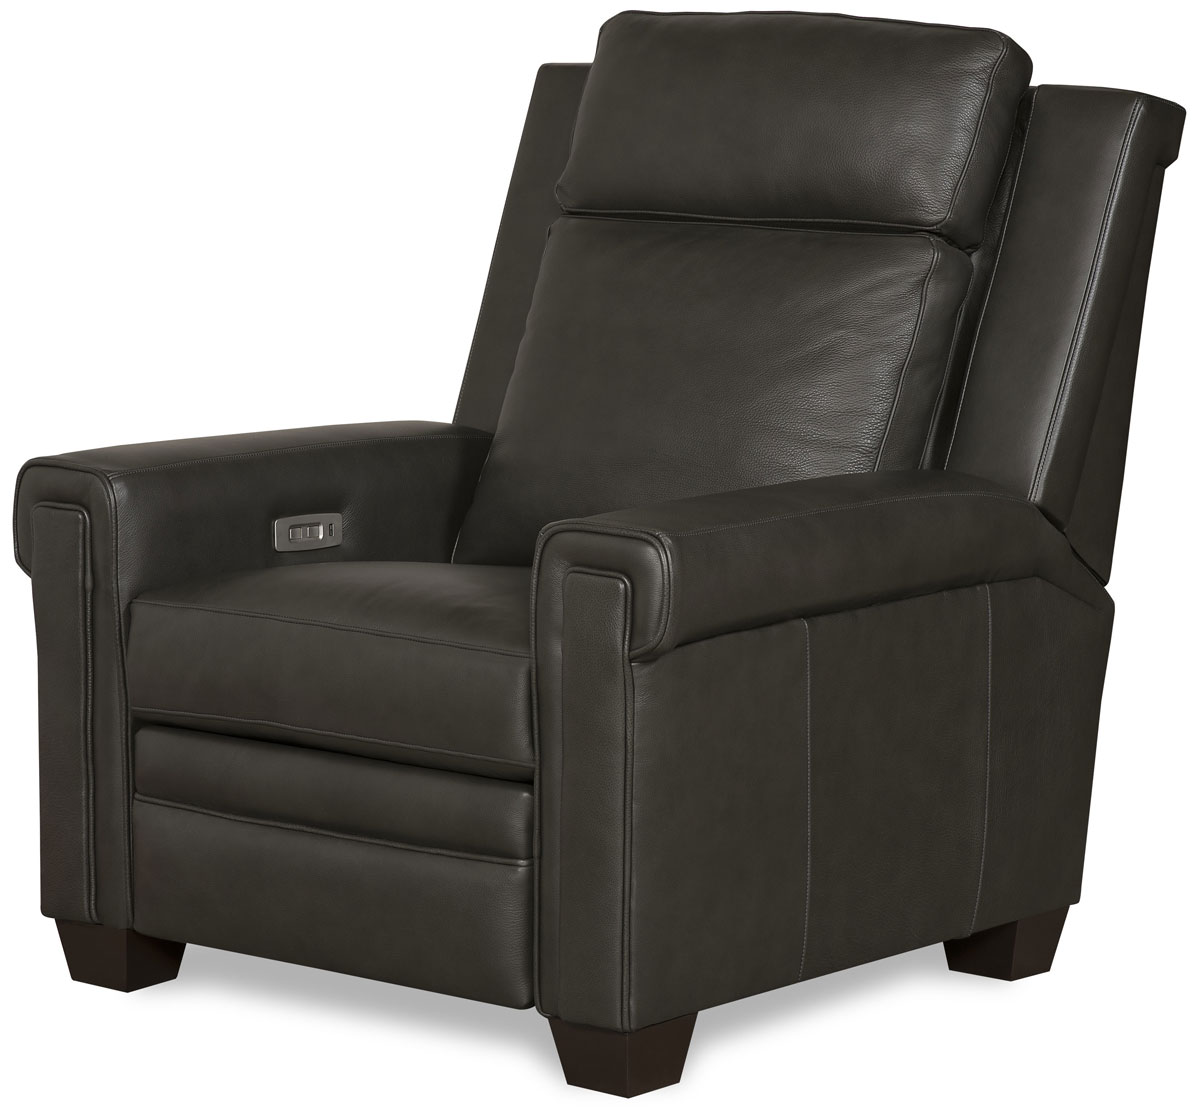 Whitley 106 Recliner by McKinley Leather